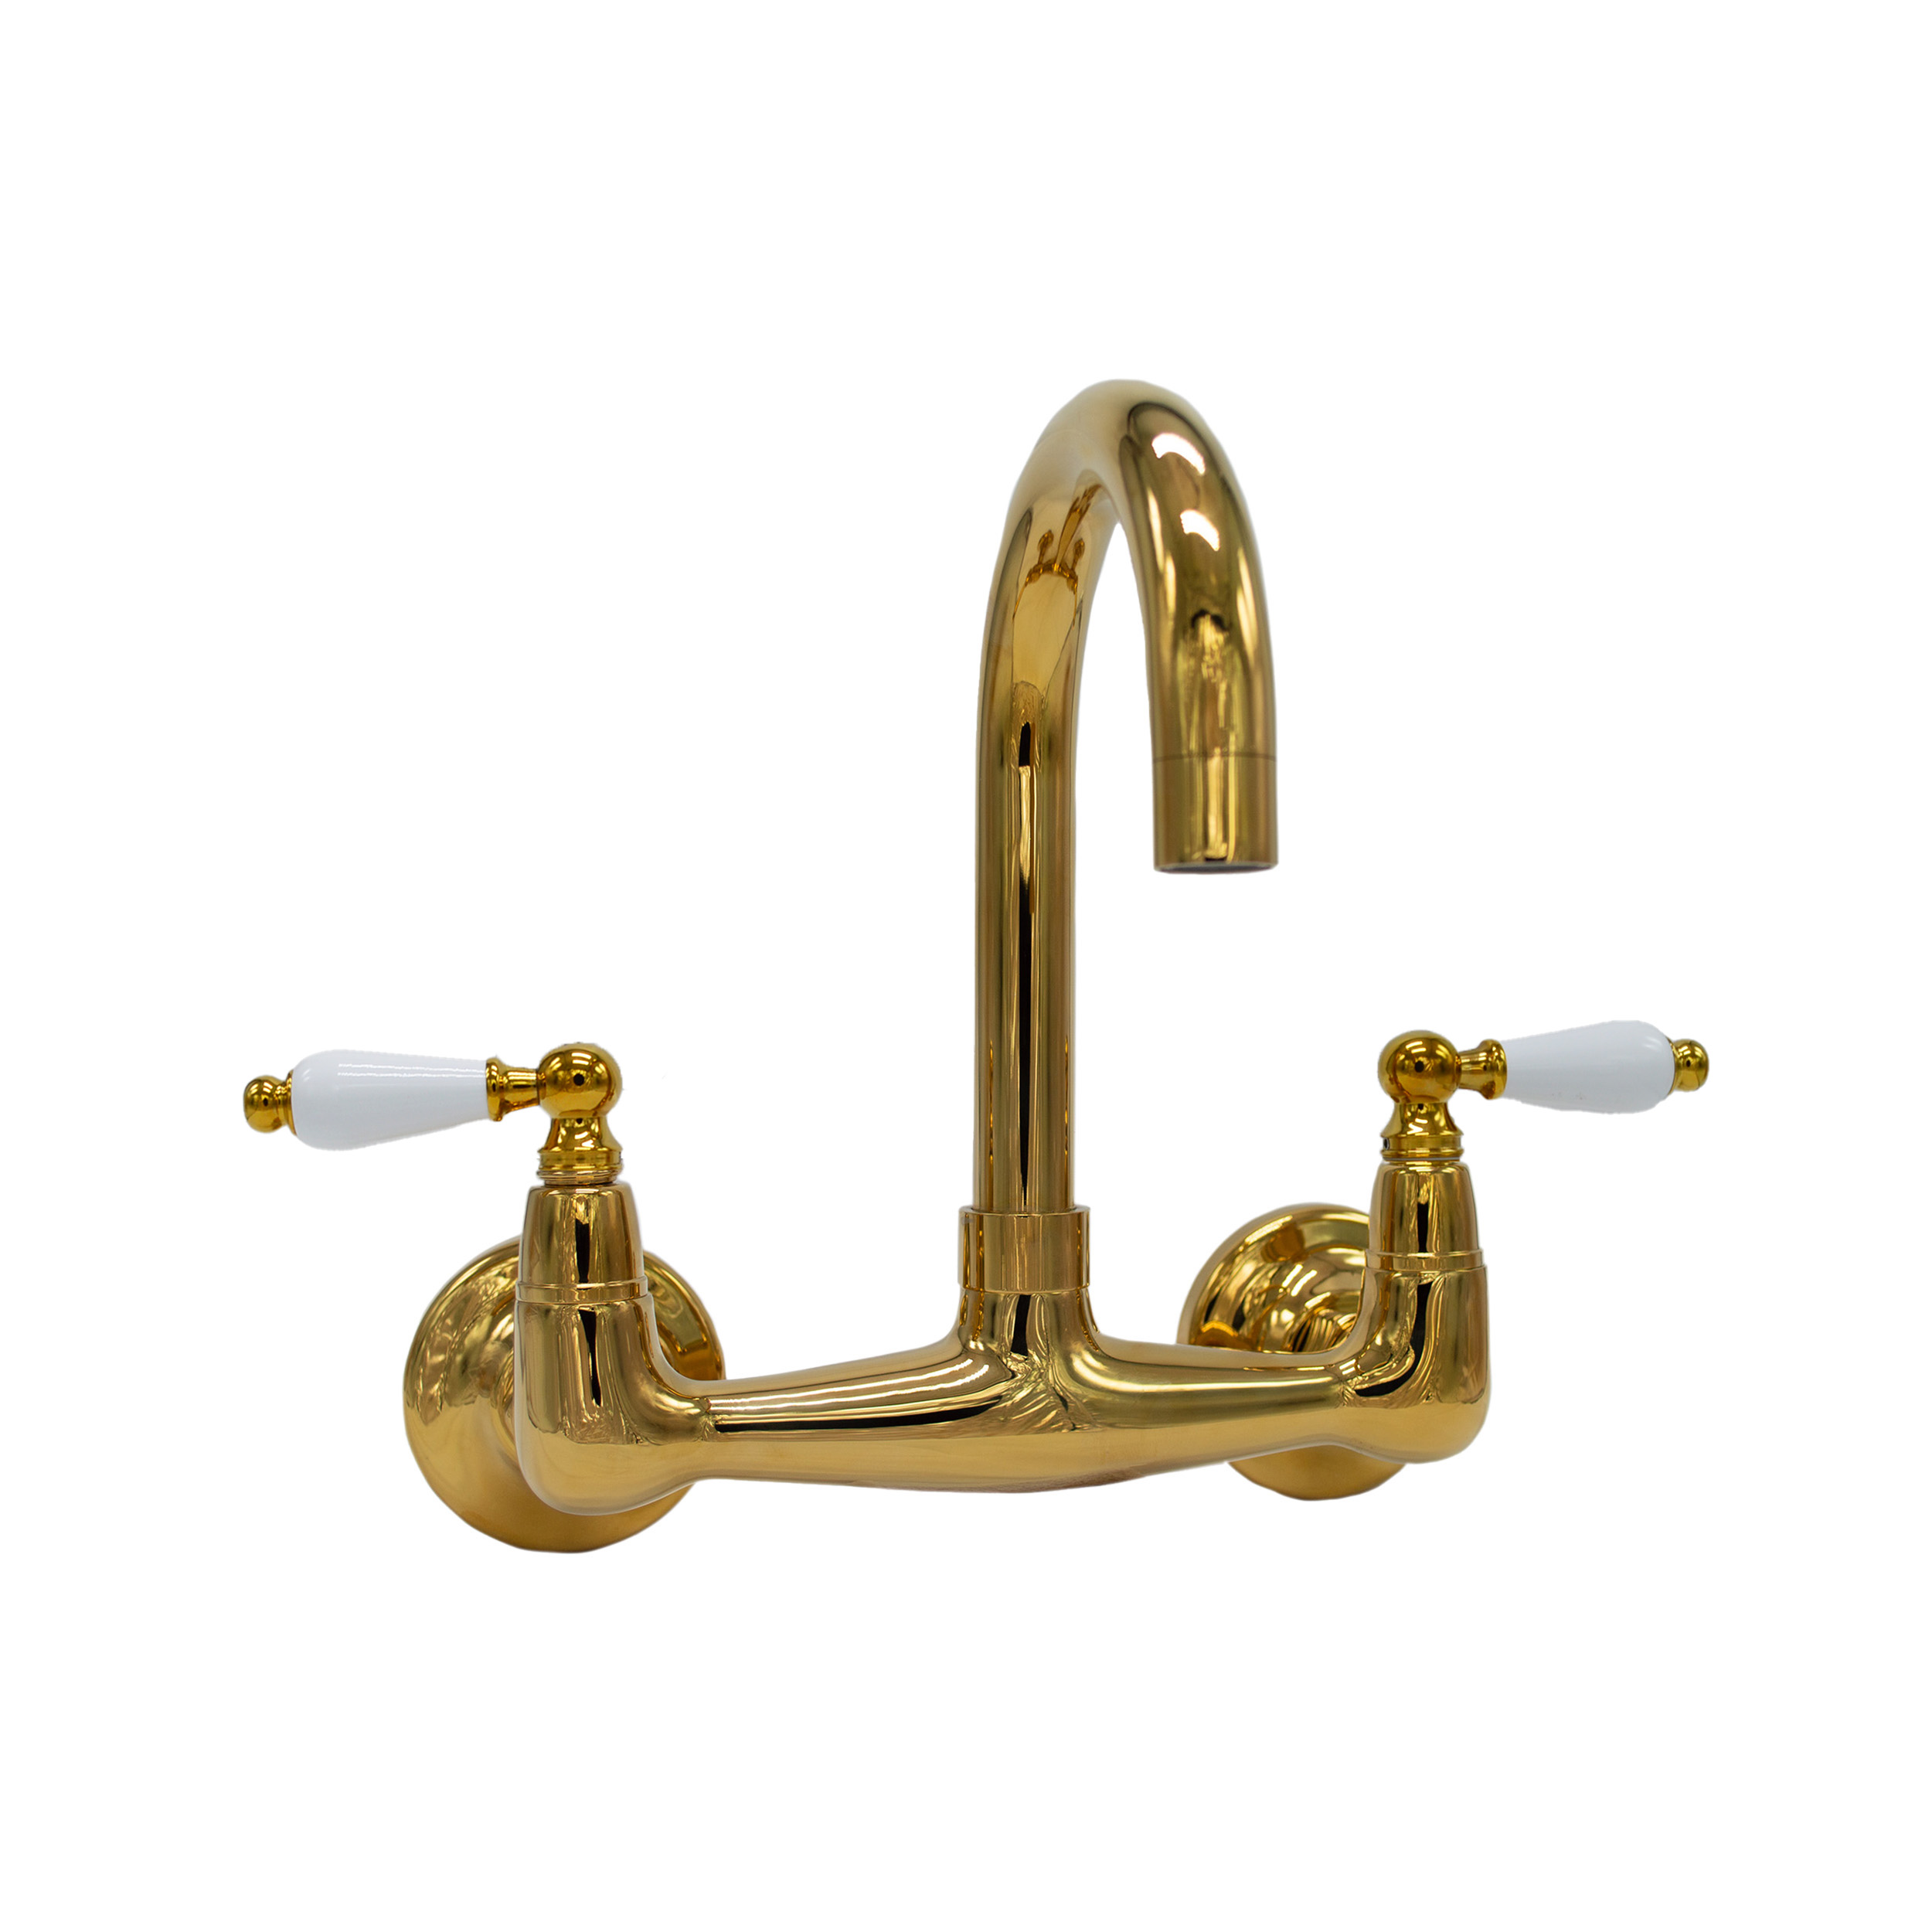 Short Reach Wall Mount Faucet With 6